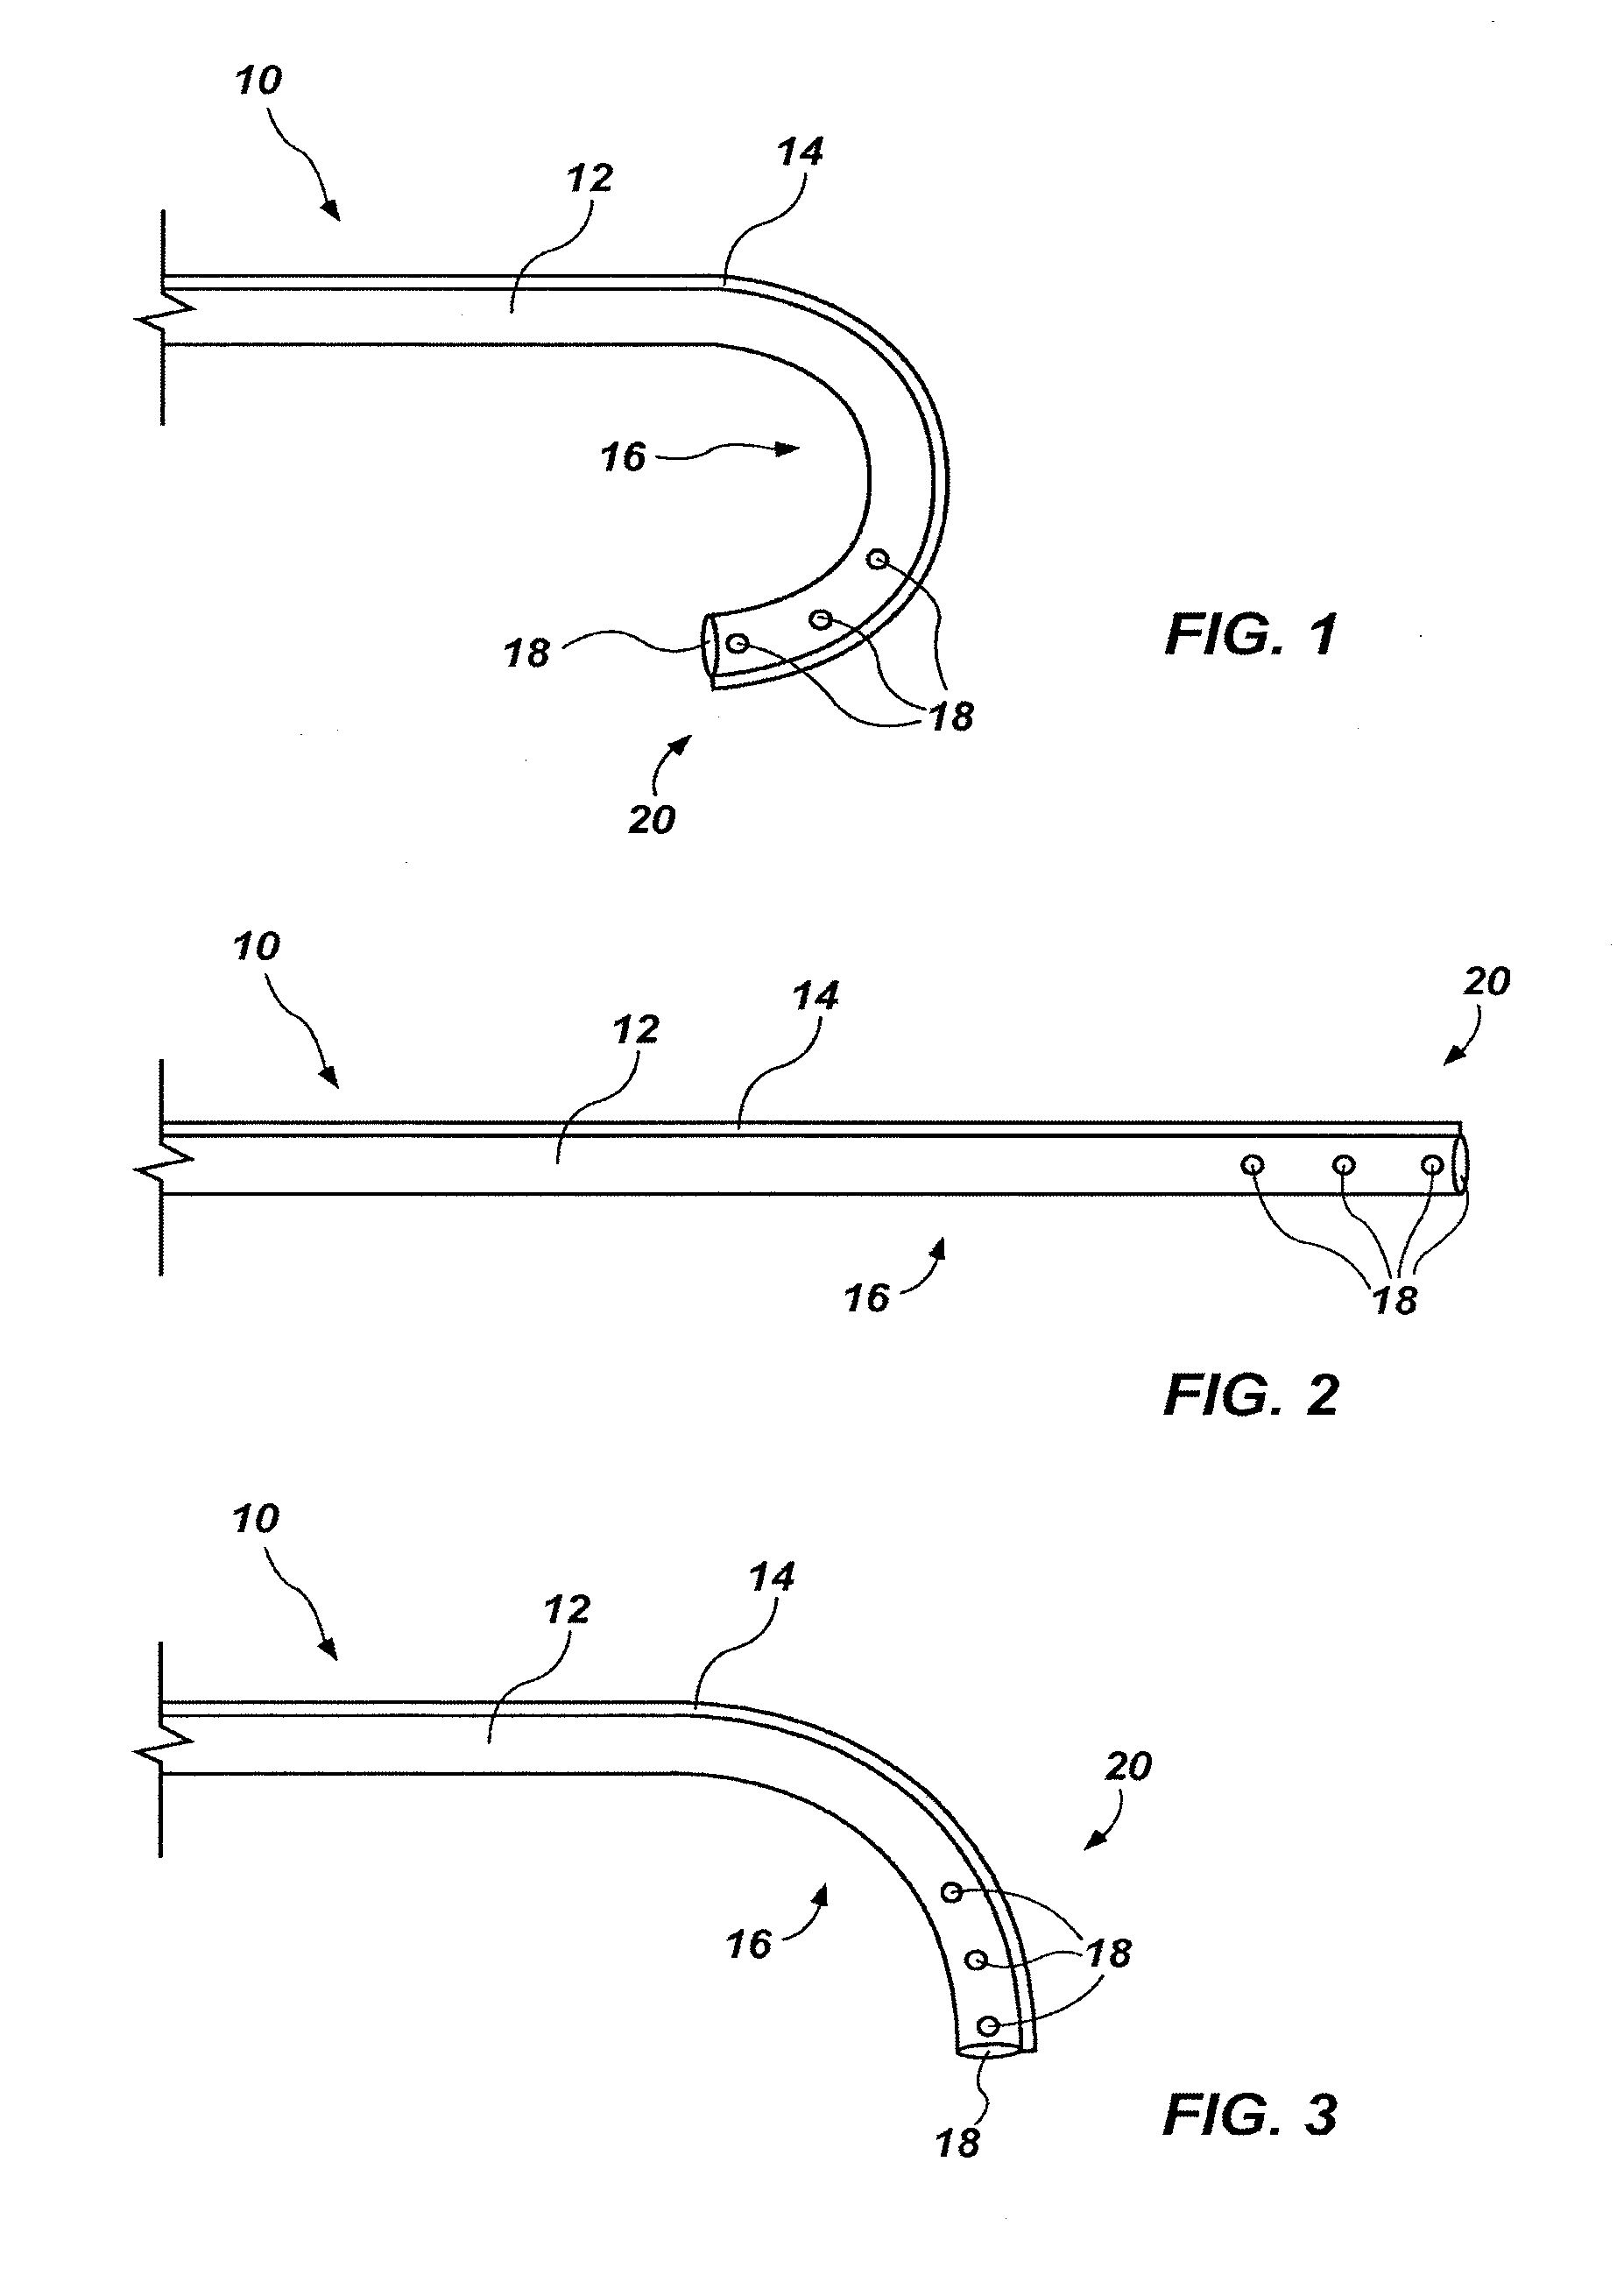 Body cavity drainage devices and related methods